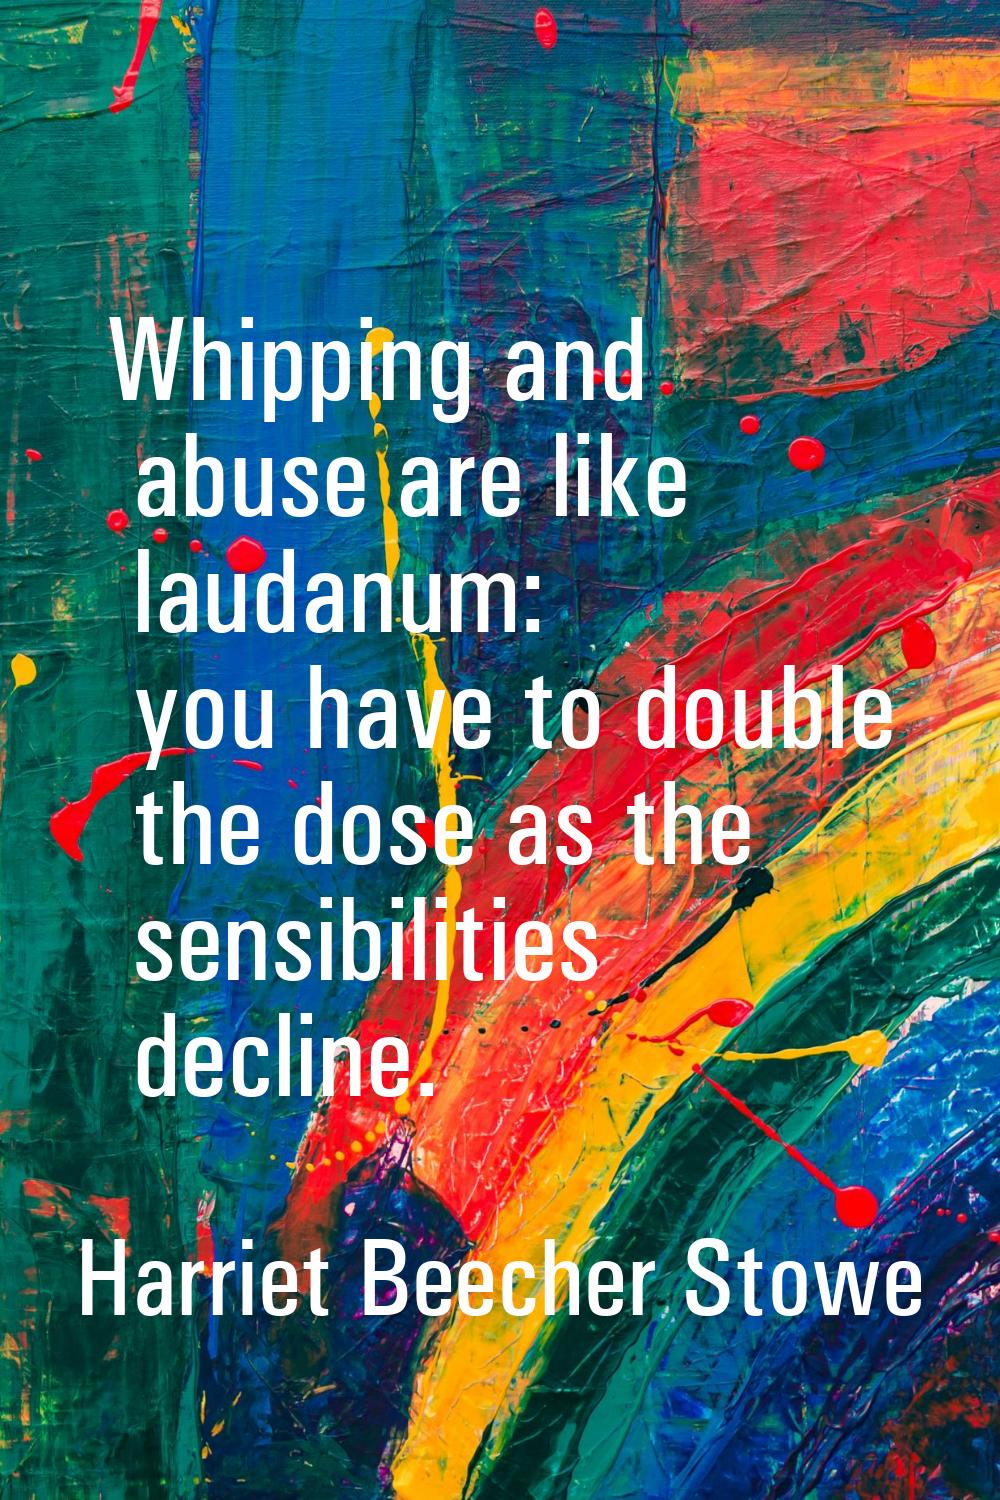 Whipping and abuse are like laudanum: you have to double the dose as the sensibilities decline.